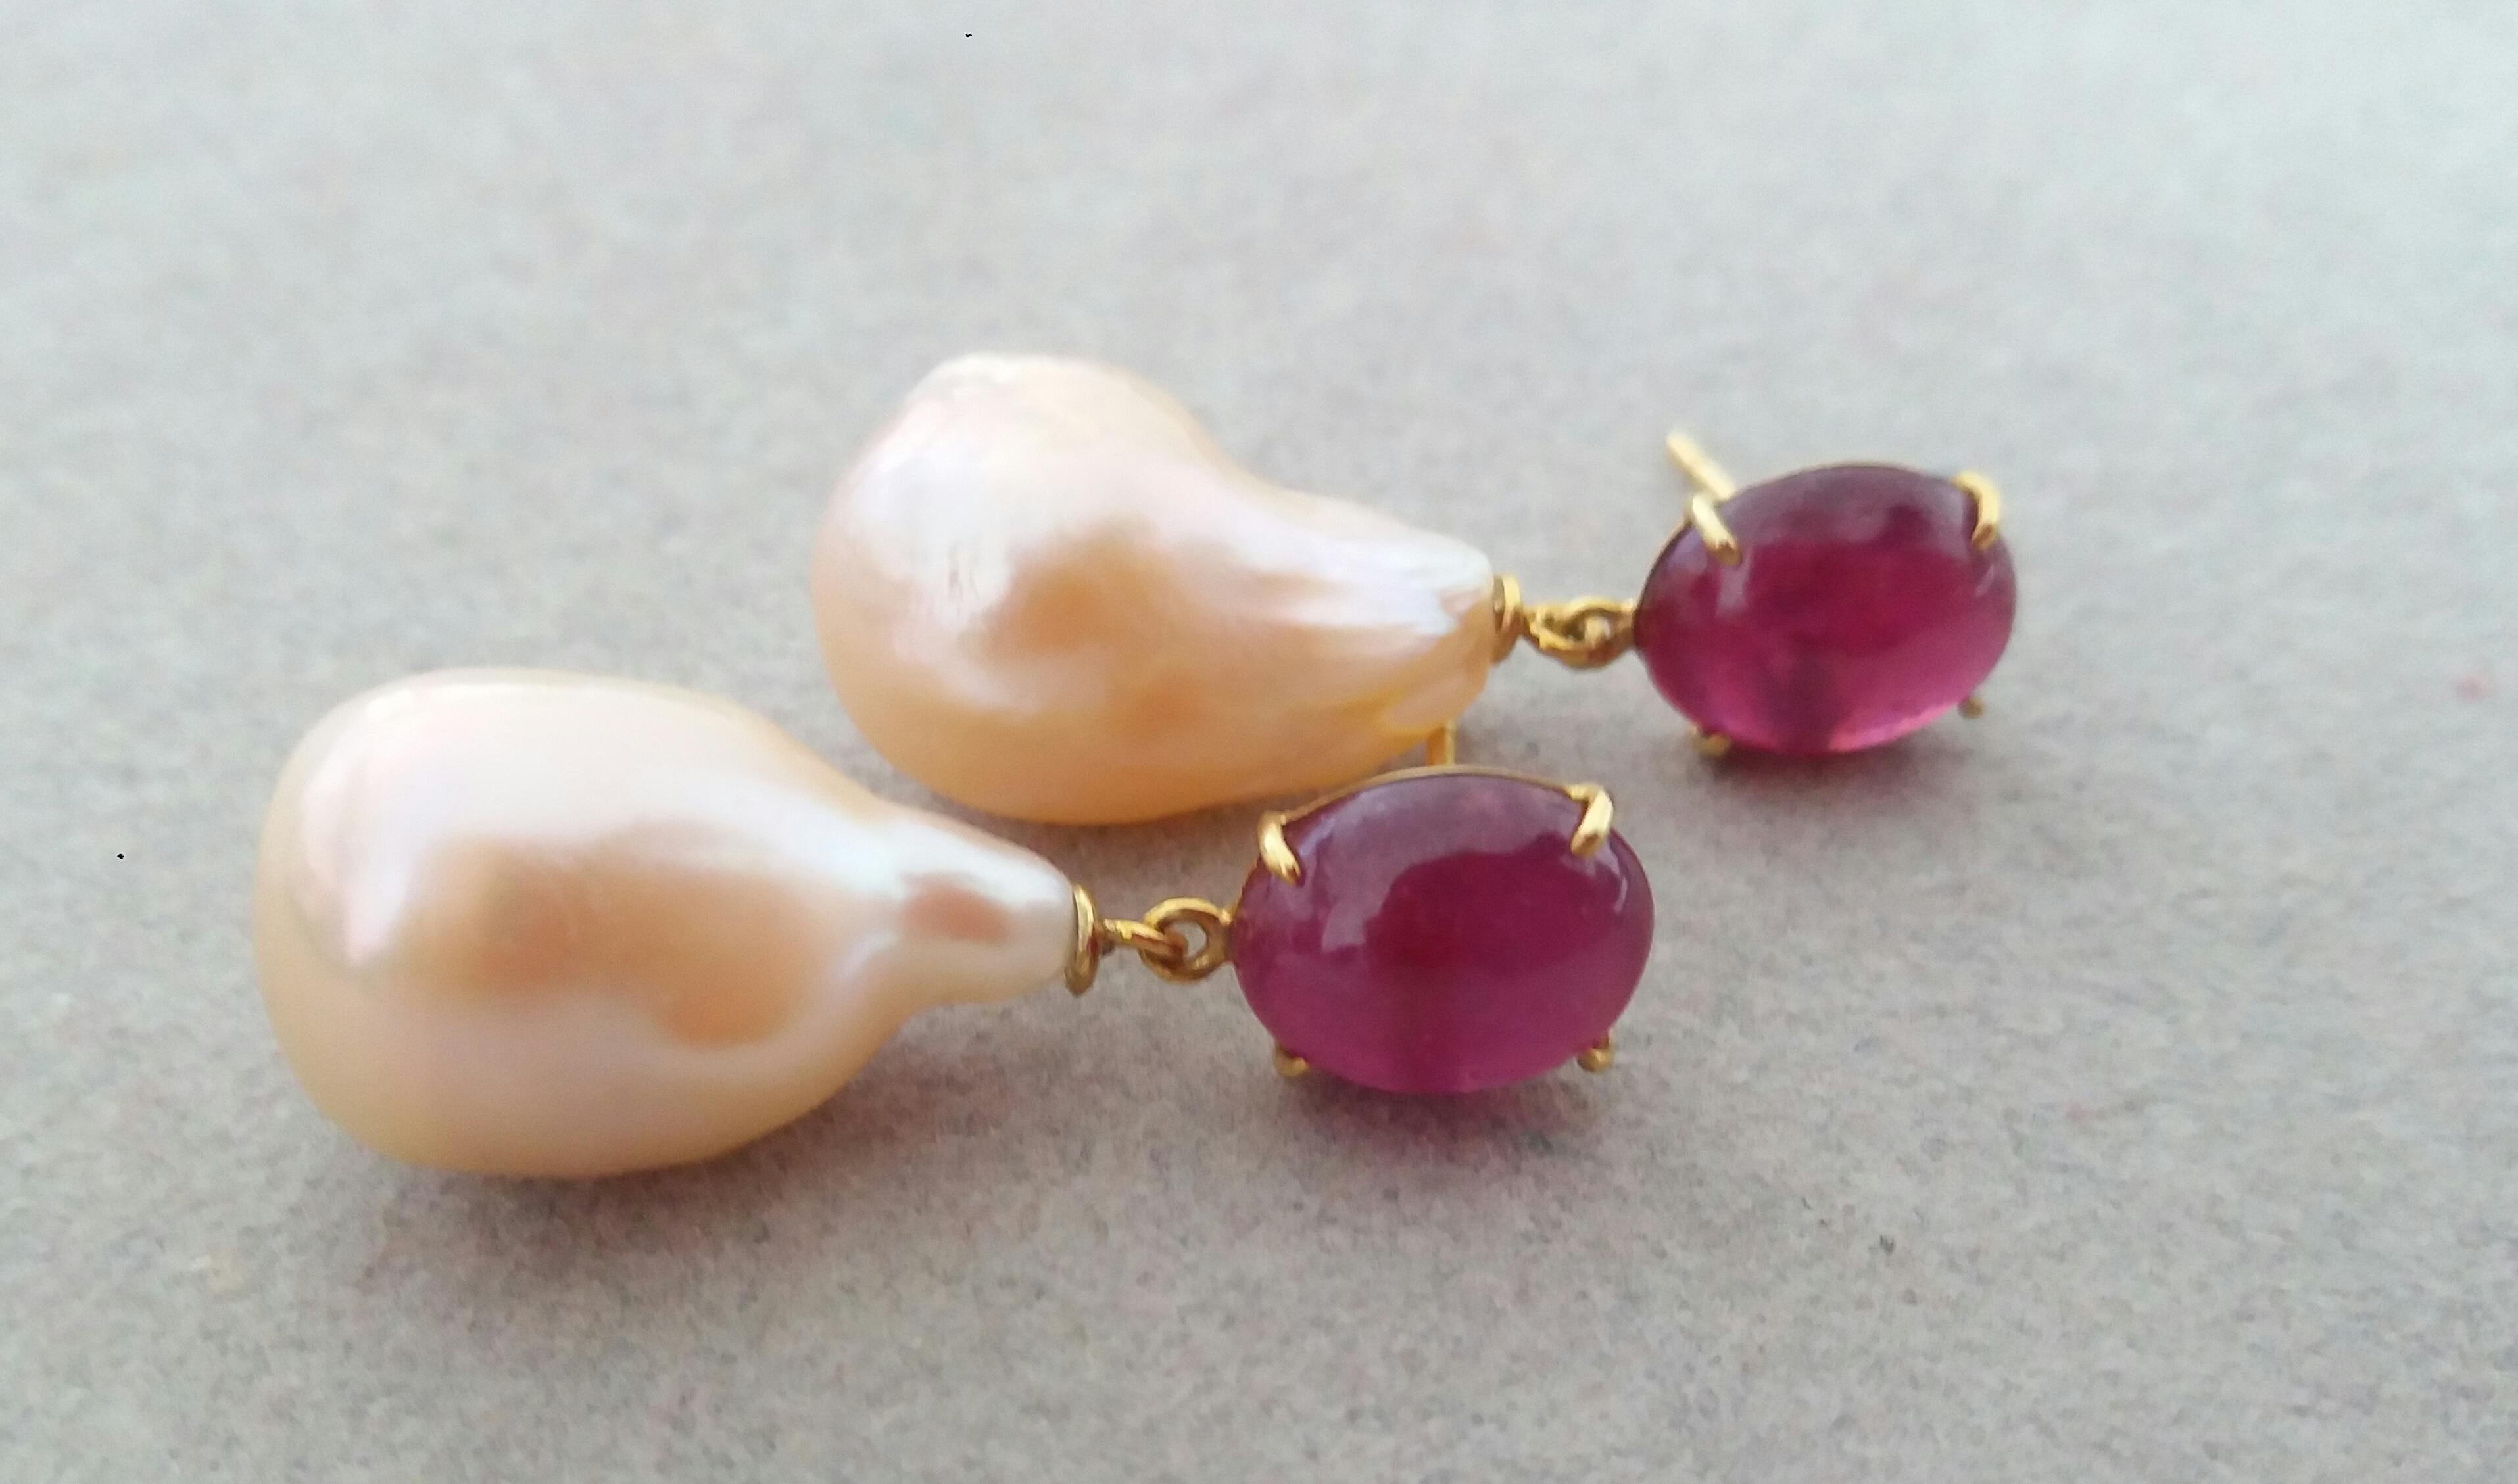 Big Size Pear Shape Cream Color Pearls Oval Ruby Cabochon 14 Karat Gold Earrings For Sale 6